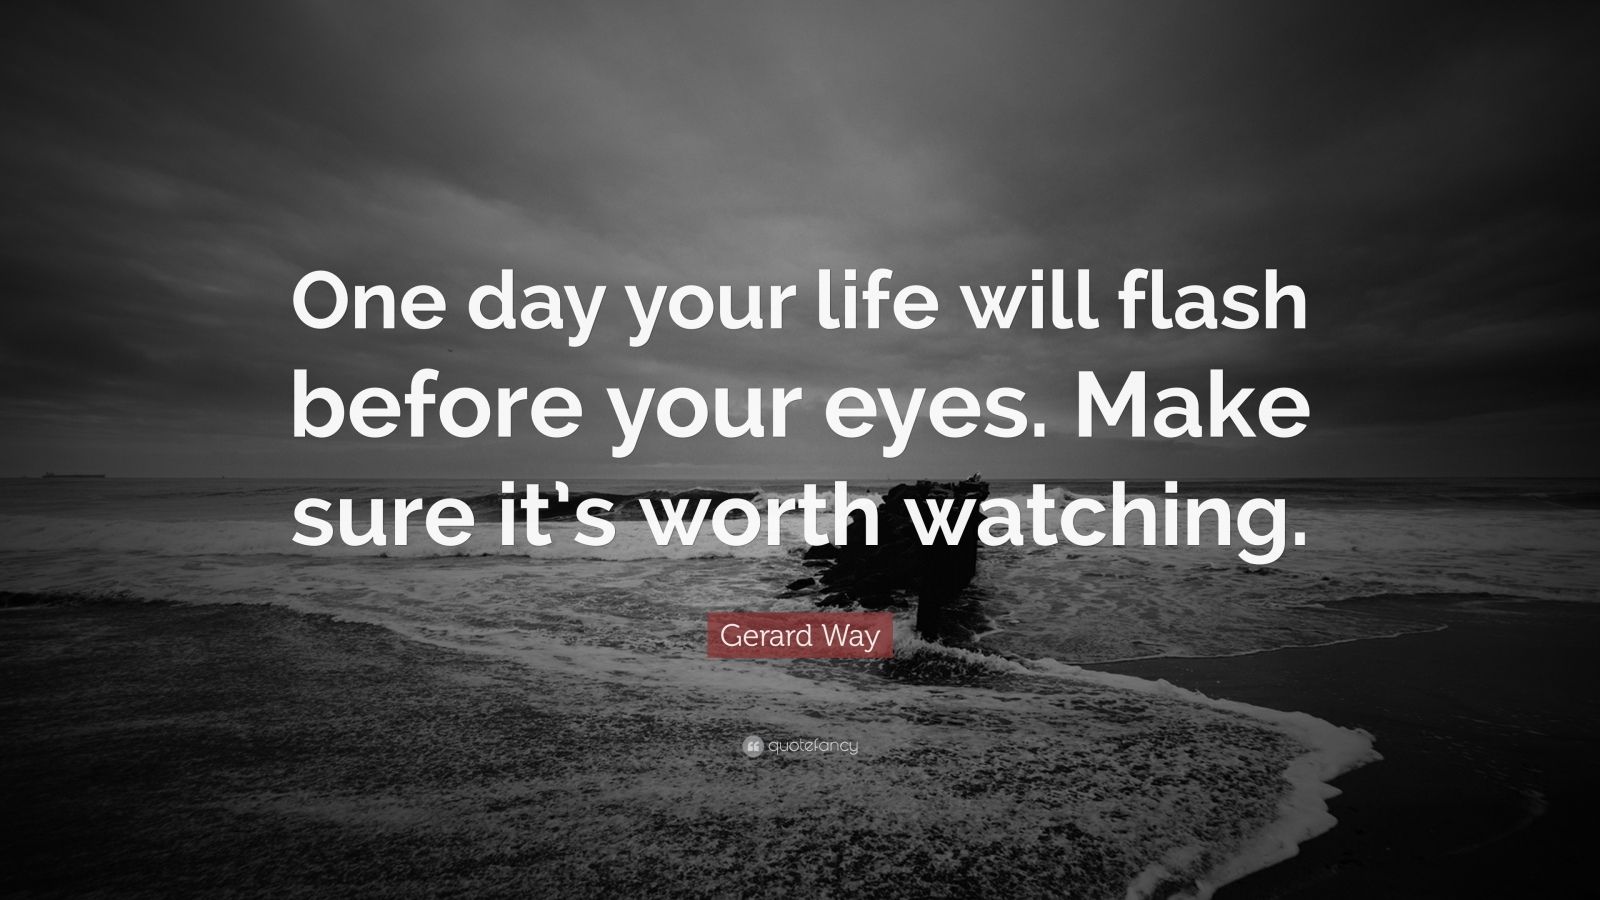 life flash before your eyes keeps going